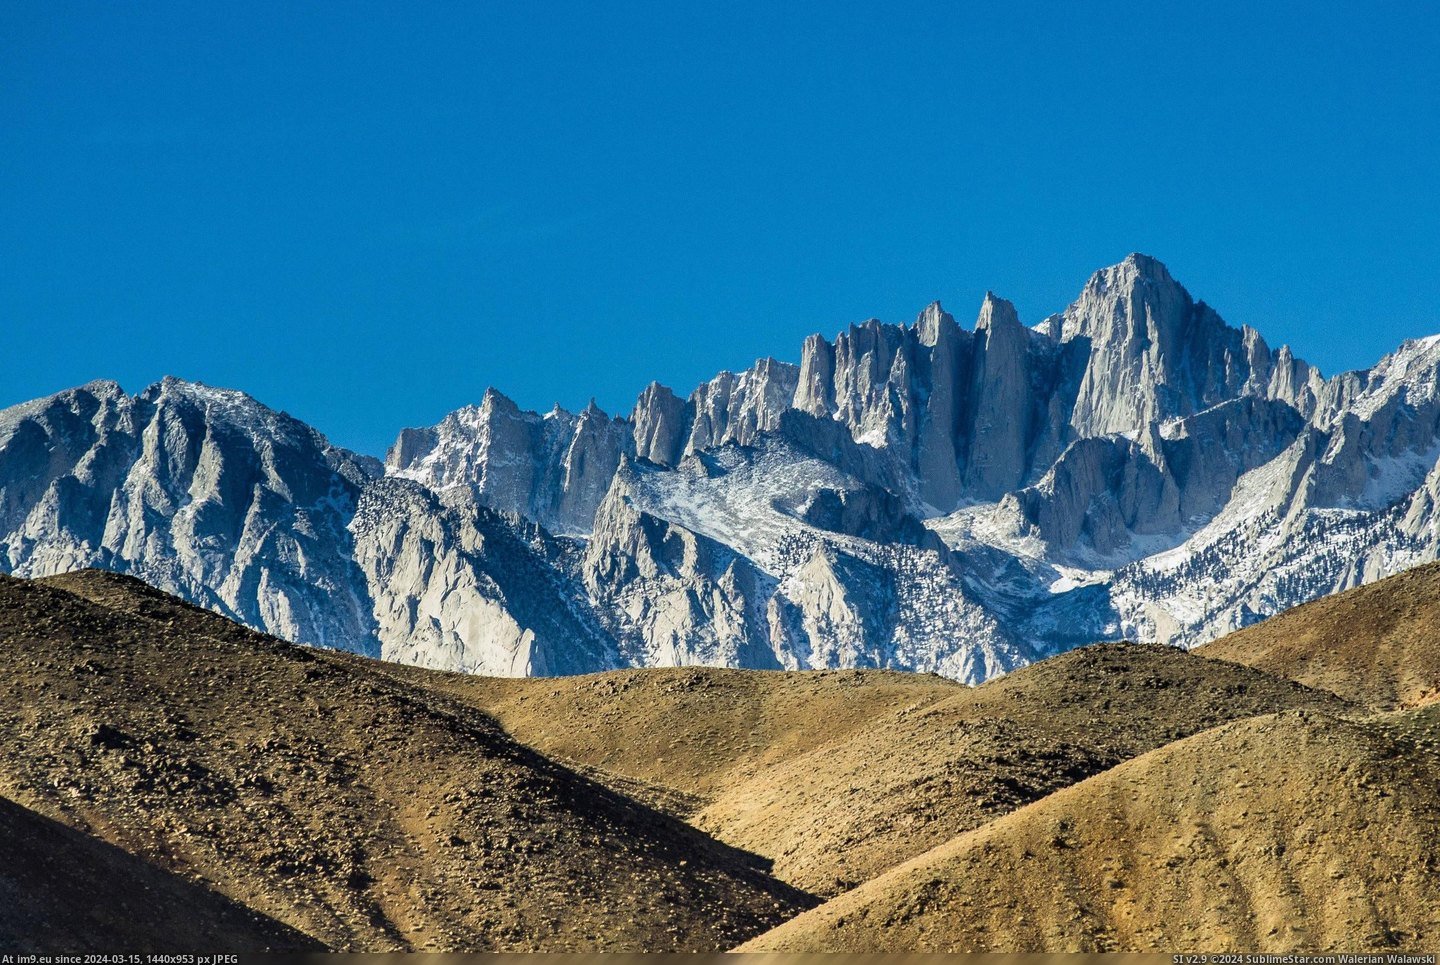 #States #Mount #Whitney #Elevation #Point #Highest [Earthporn] Mount Whitney, CA - Elevation 14,505, Prominence 10,079 - The highest point in the lower 48 states [2429x1619] Pic. (Obraz z album My r/EARTHPORN favs))